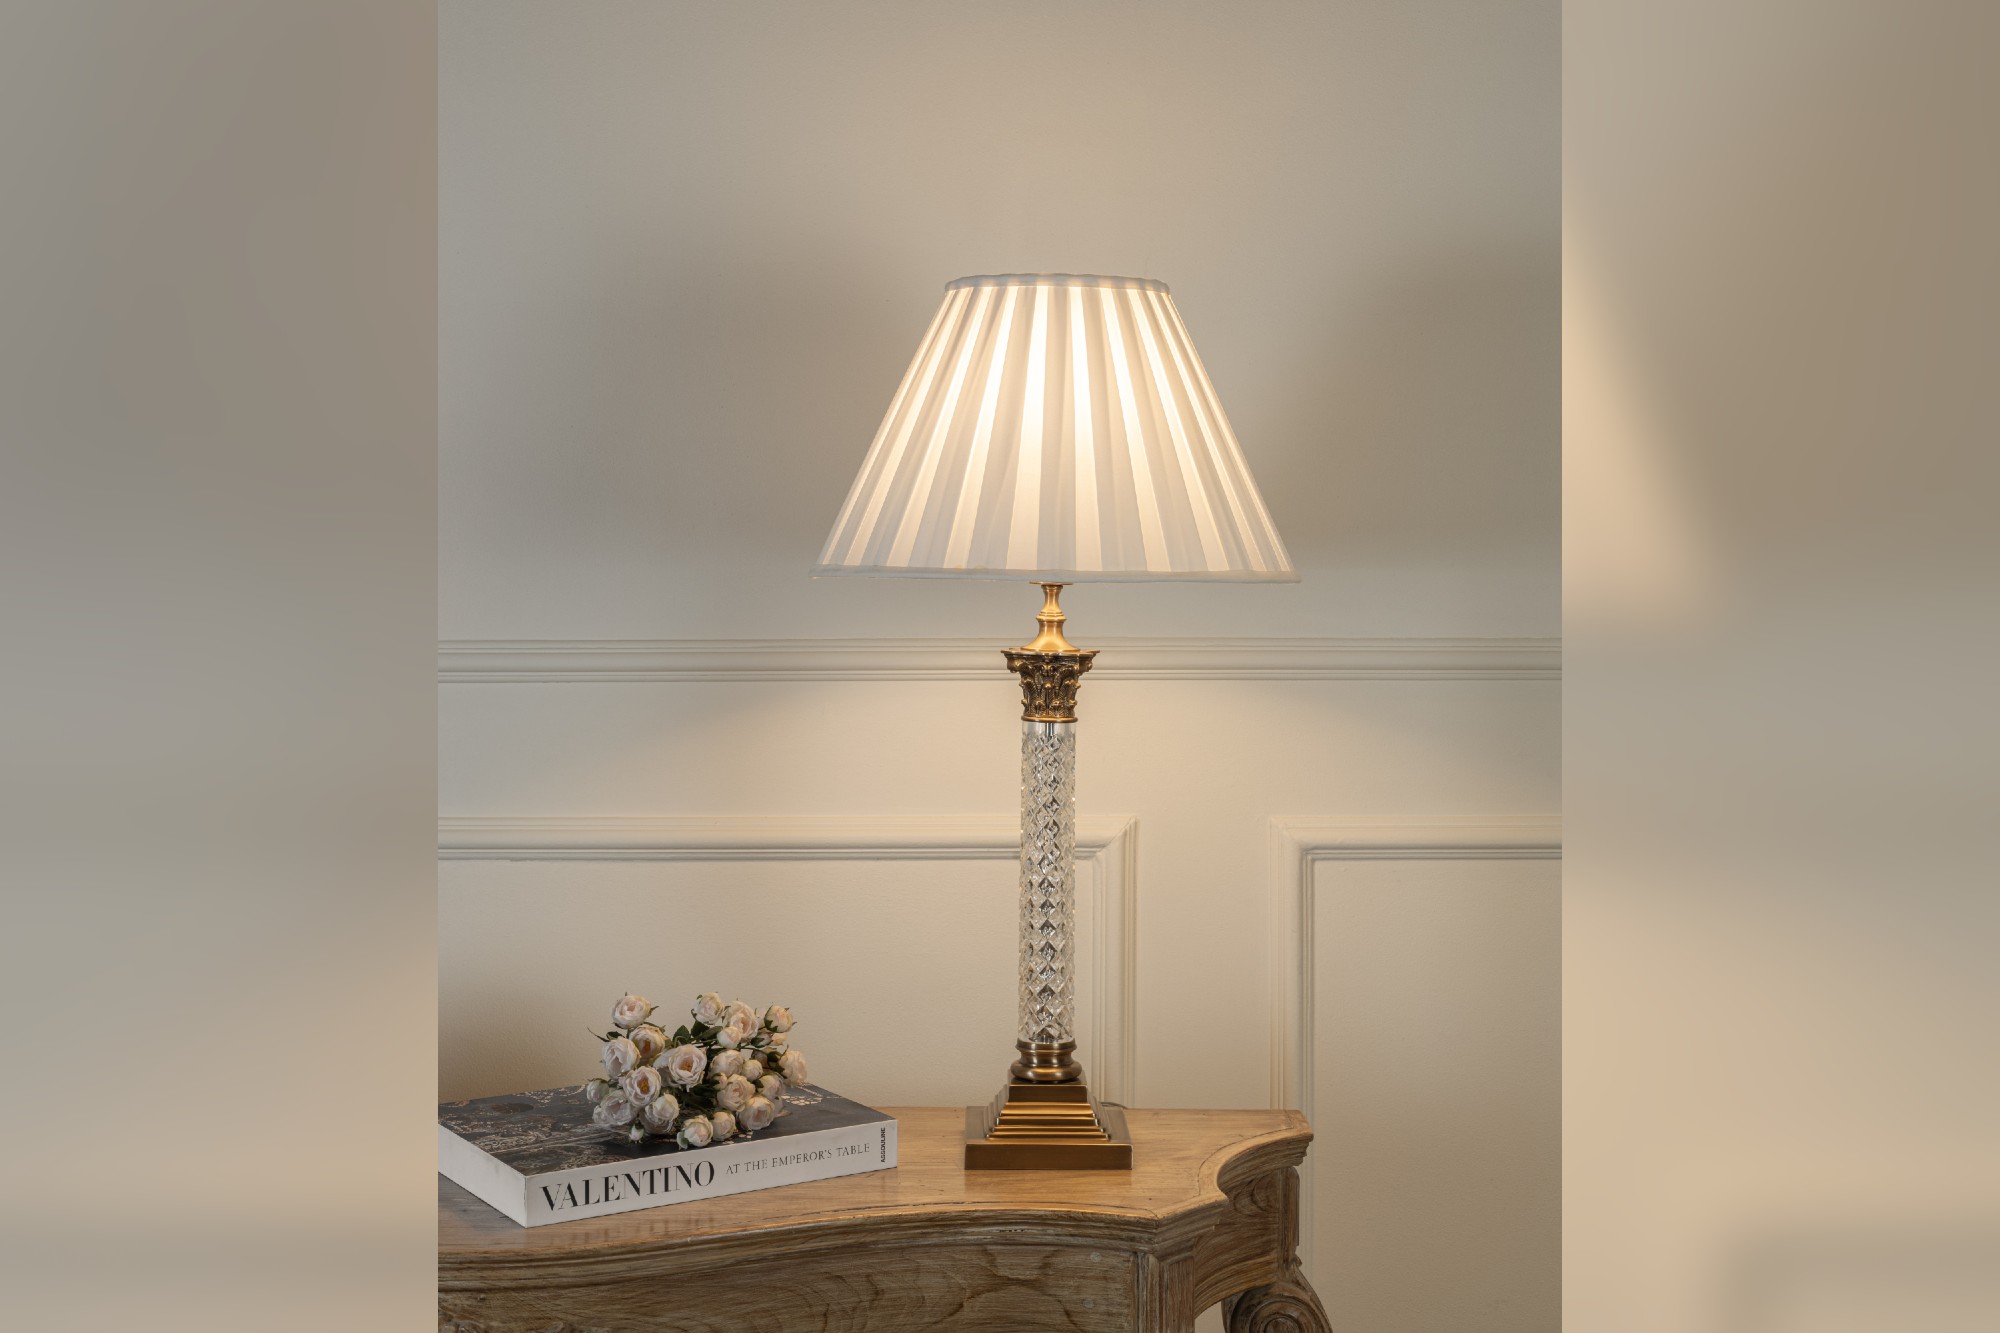 Luxurious lamp collection by Luxaddi